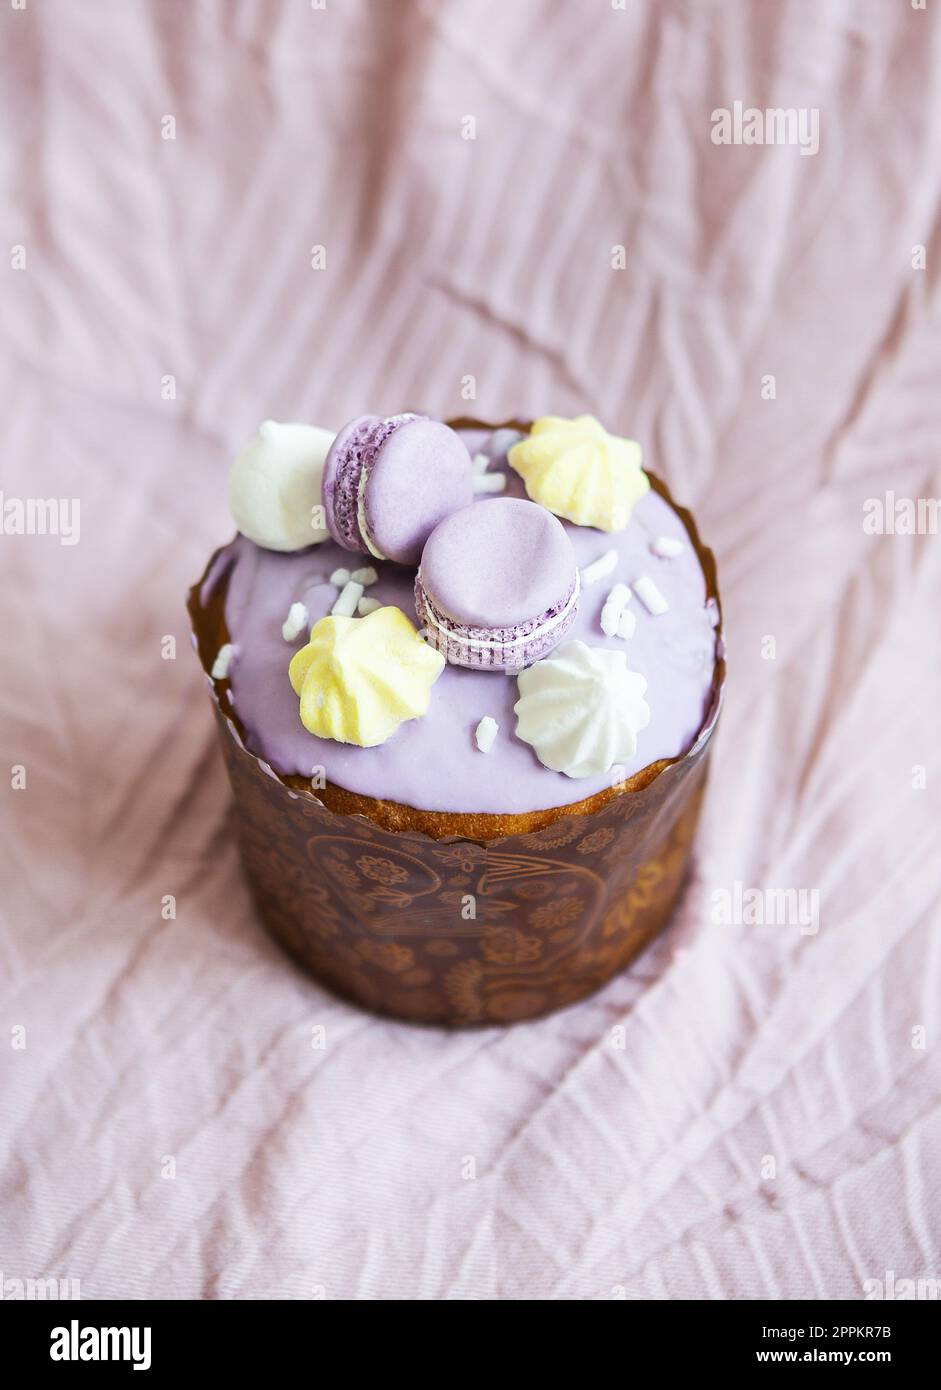 A traditional paska decorated with white Swiss chocolate and meringue stands on a lavender tablecloth. Easter holiday. Stock Photo